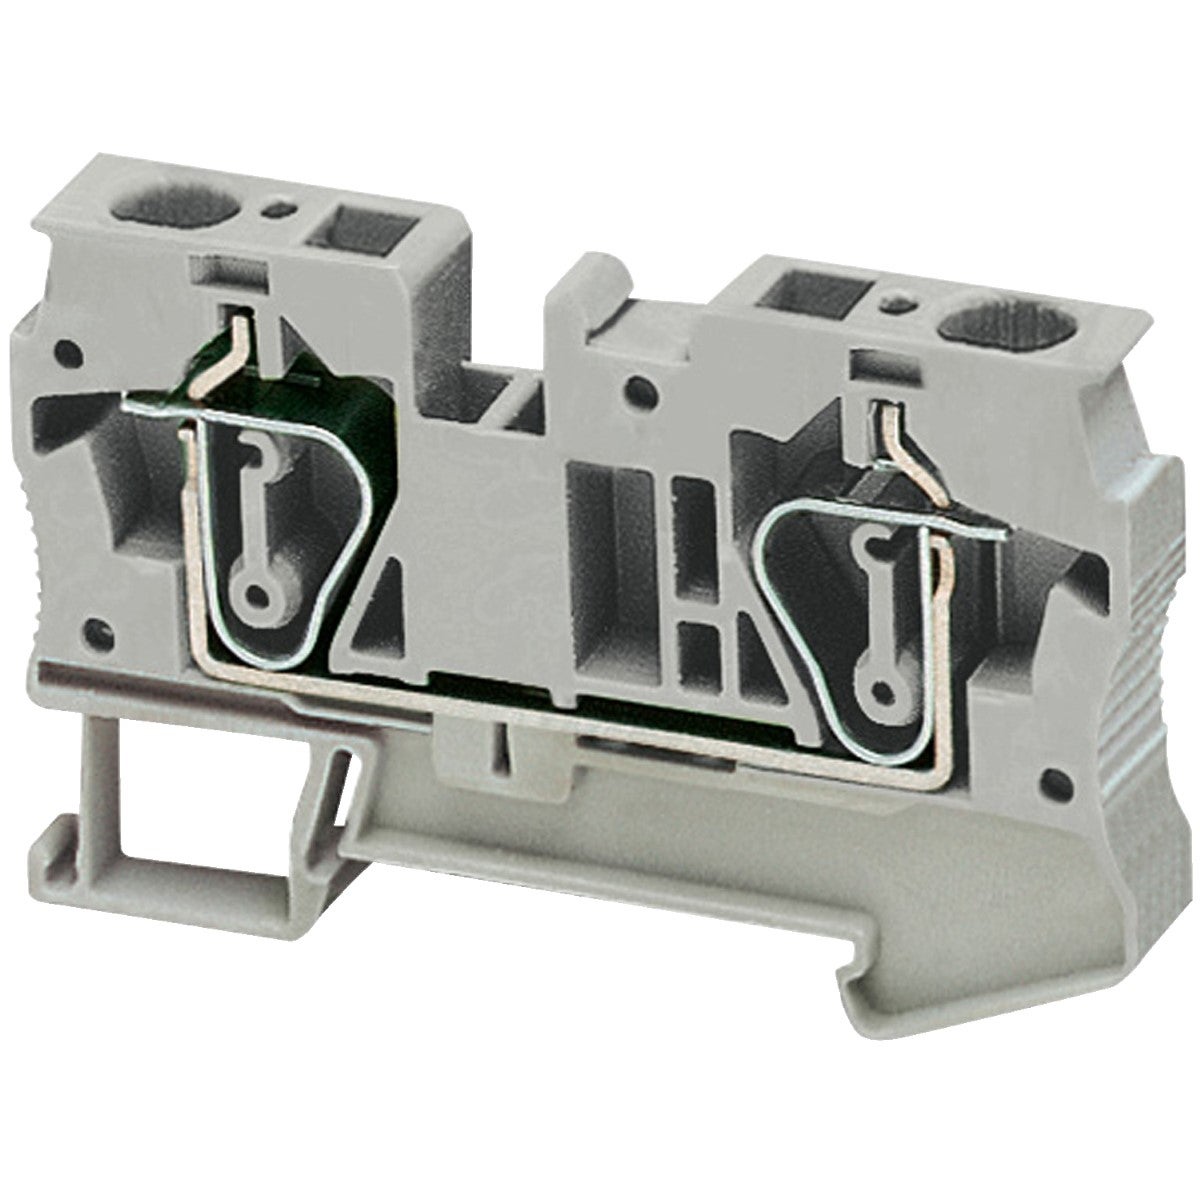 Terminal block, Linergy TR, spring type, feed through, 2 points, 6mm�, grey, set of 50